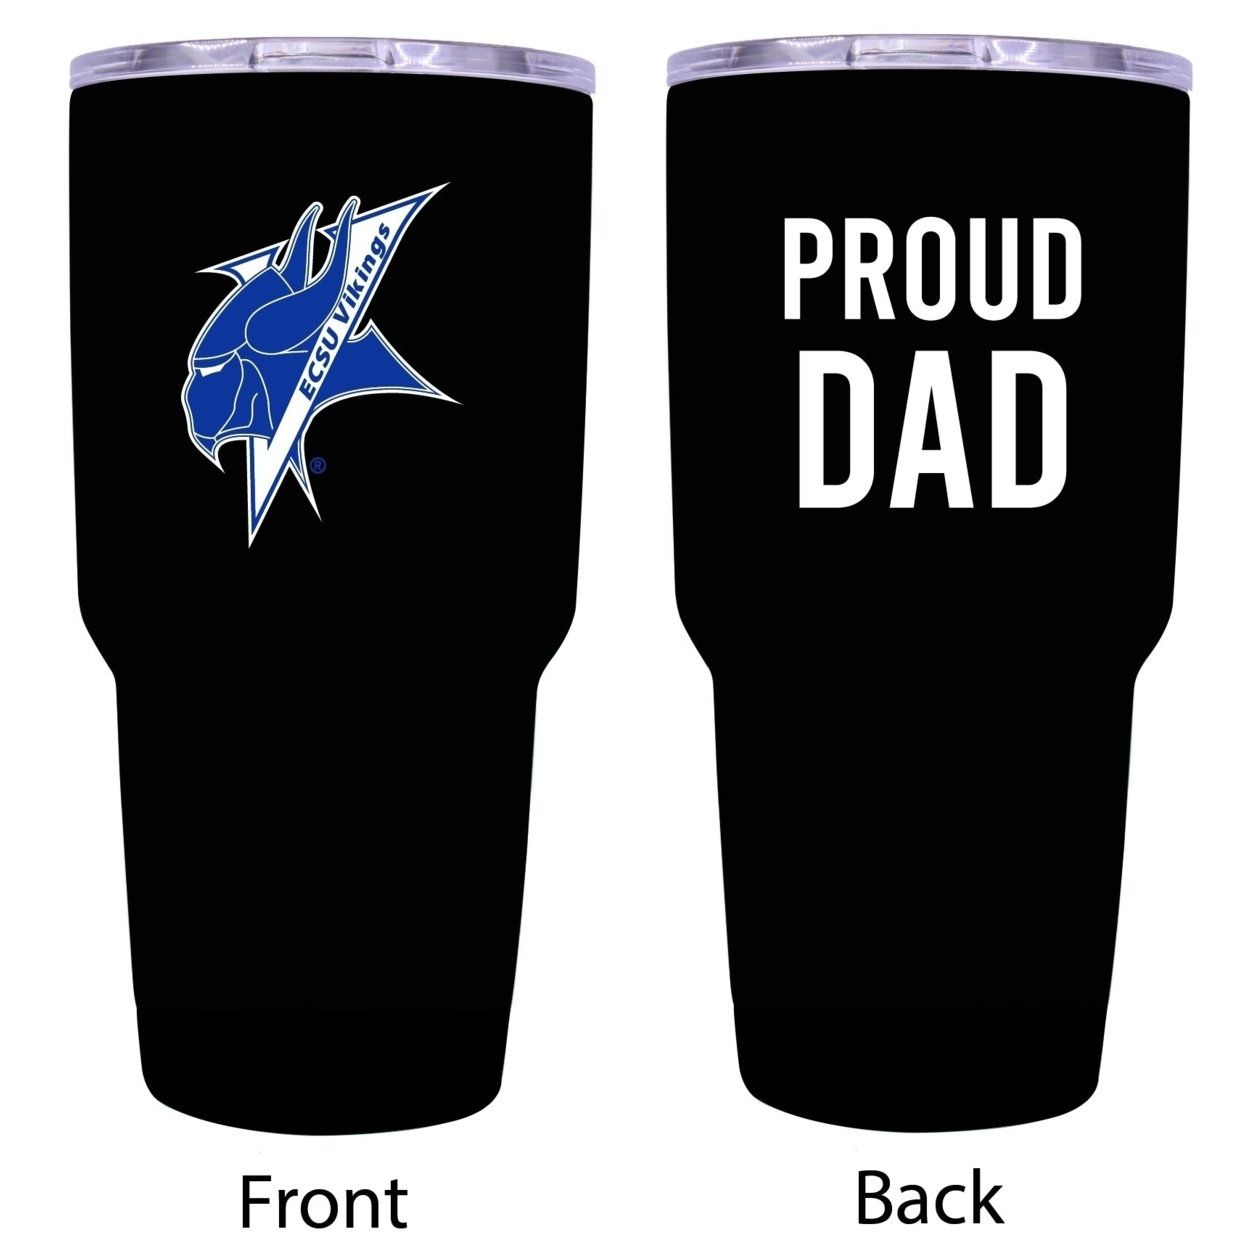 Elizabeth City State University Proud Dad Insulated Stainless Steel Tumbler